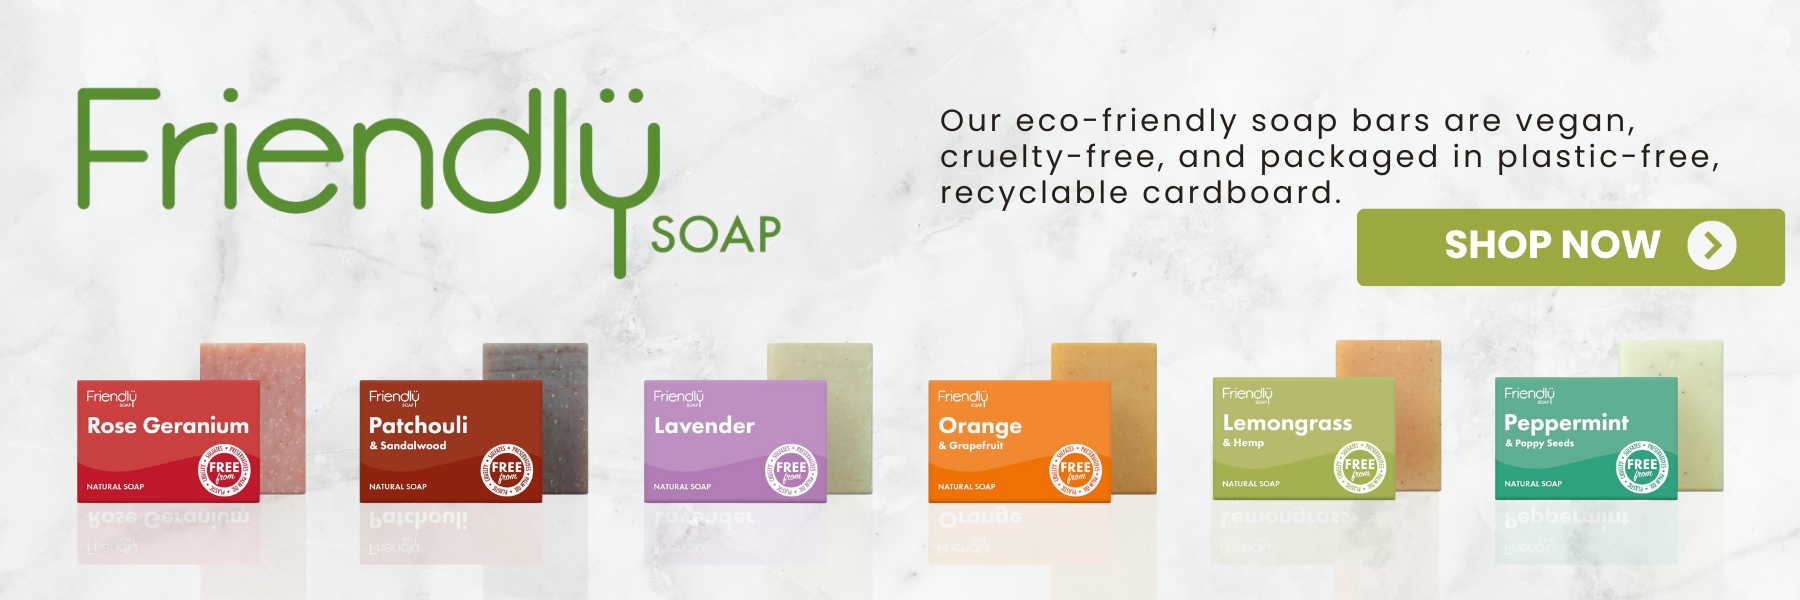 Discover eco-conscious cleansing with our friendly soap bars. Vegan, cruelty-free, and packaged in environmentally-friendly, recyclable cardboard.